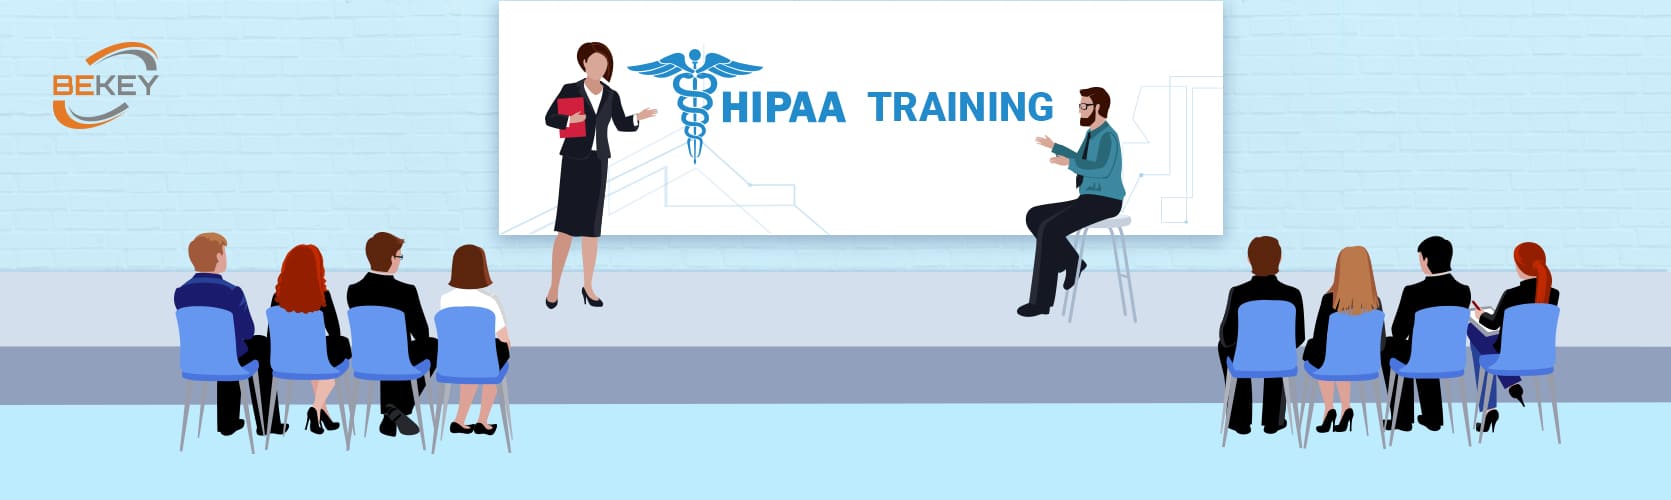 How to build HIPAA training for your digital tech business 